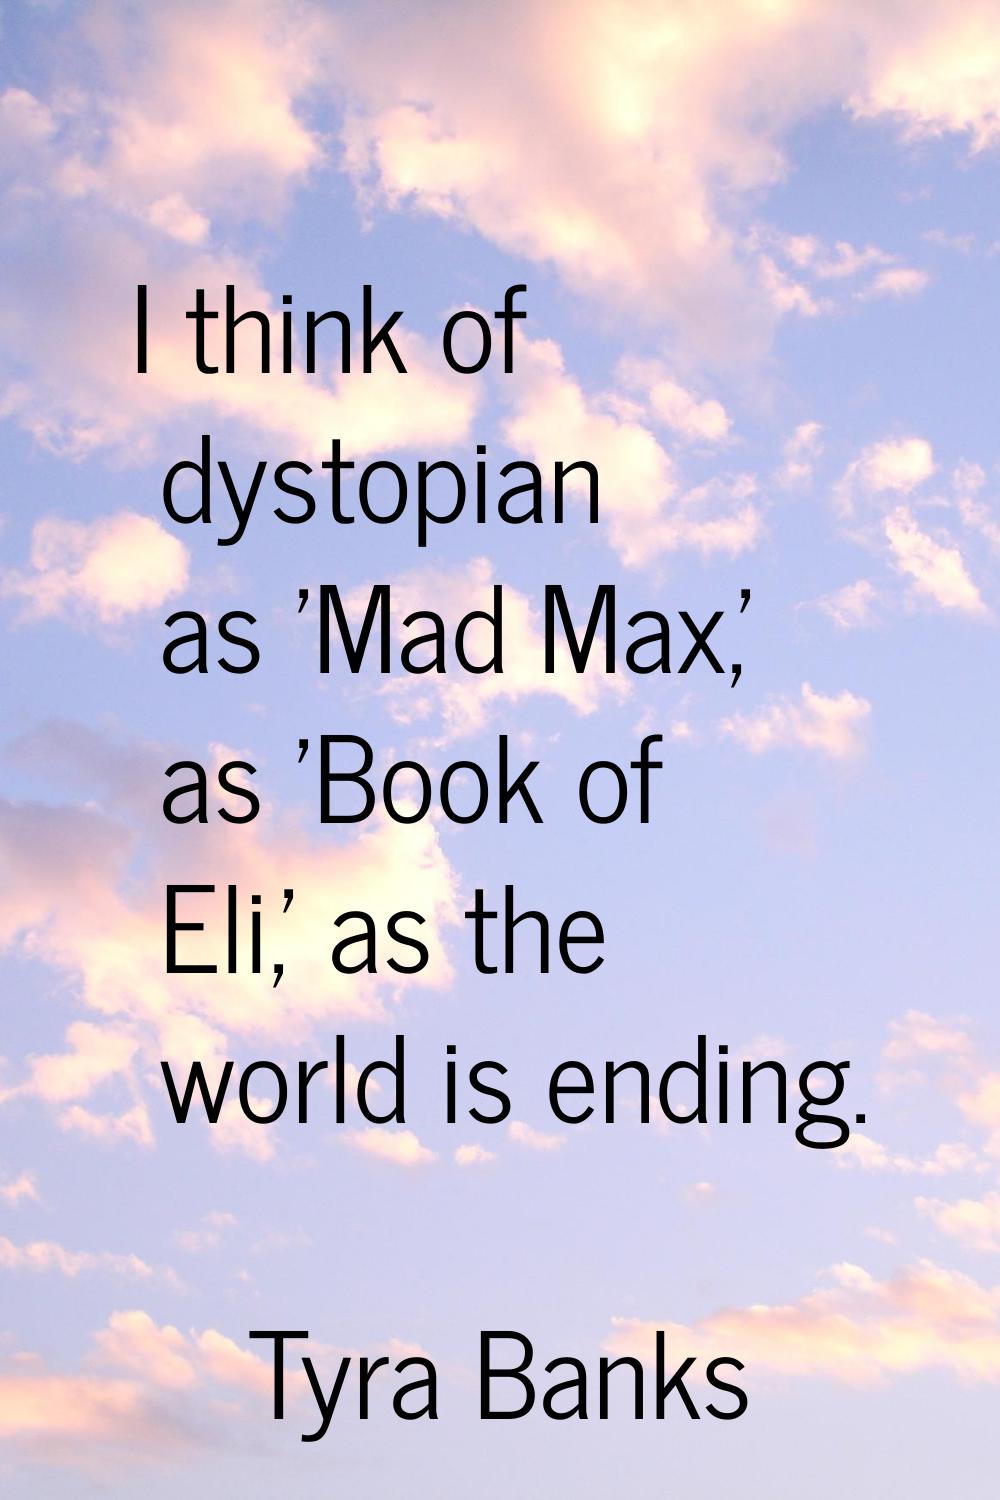 I think of dystopian as 'Mad Max,' as 'Book of Eli,' as the world is ending.